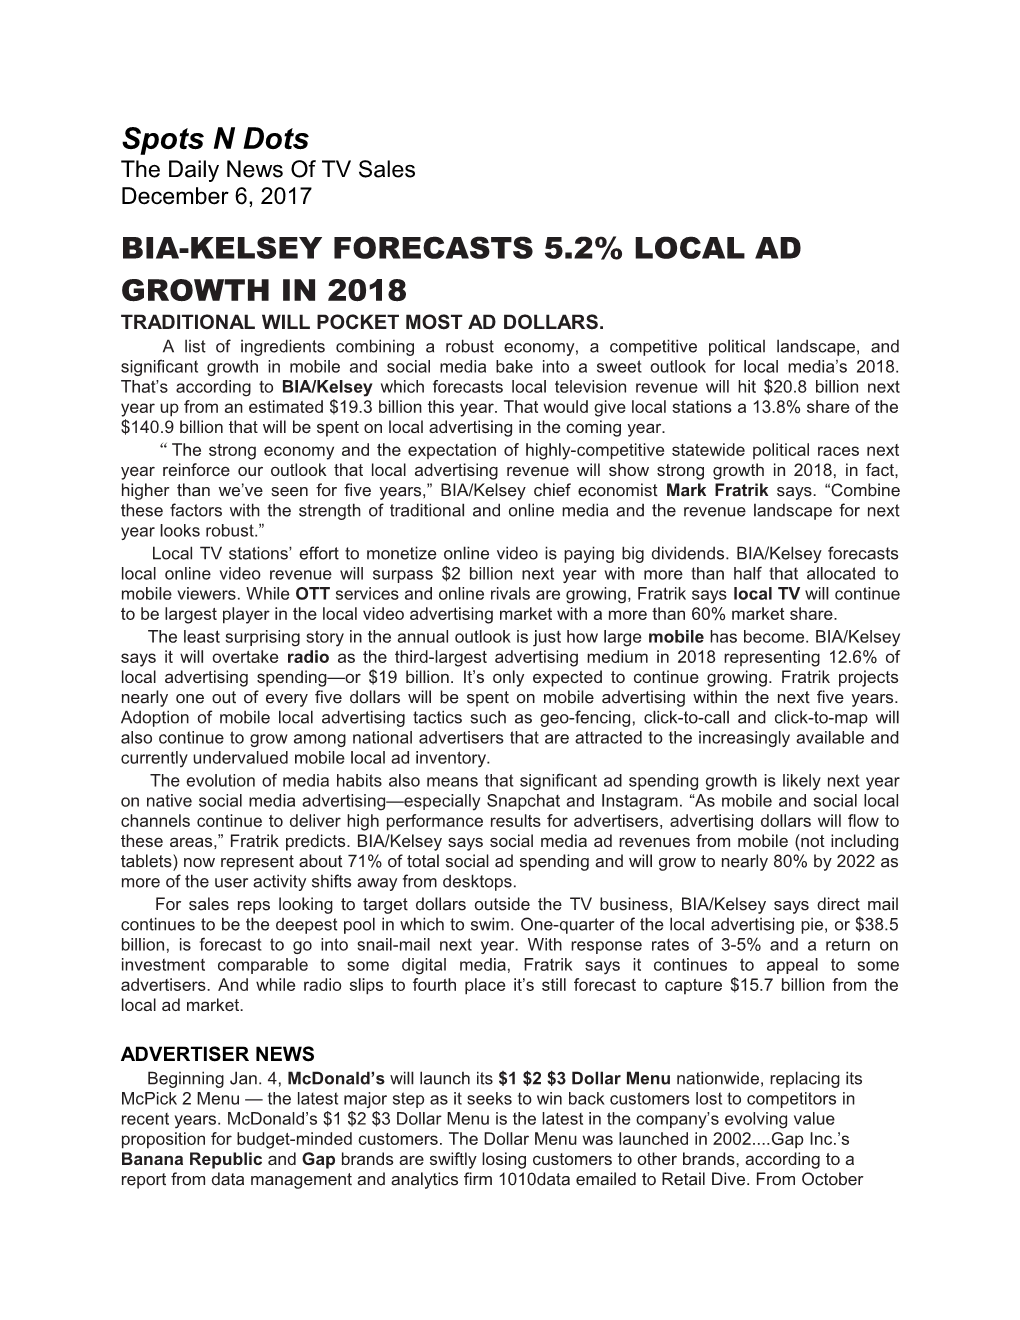 Bia-Kelsey Forecasts 5.2% Local Ad Growth in 2018